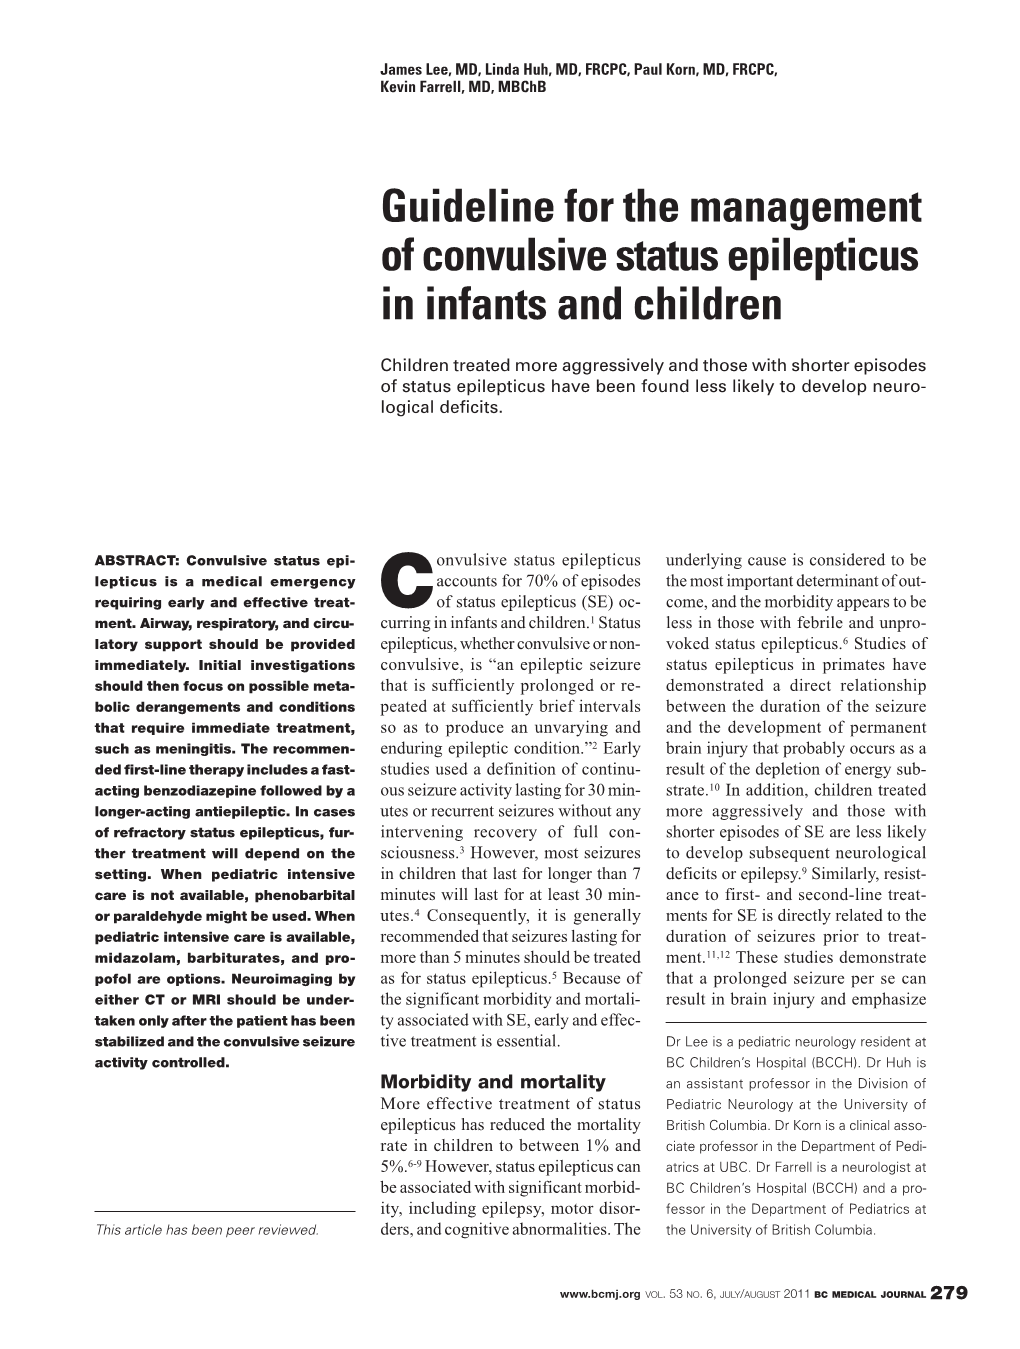 Guideline for the Management of Convulsive Status Epilepticus in Infants and Children